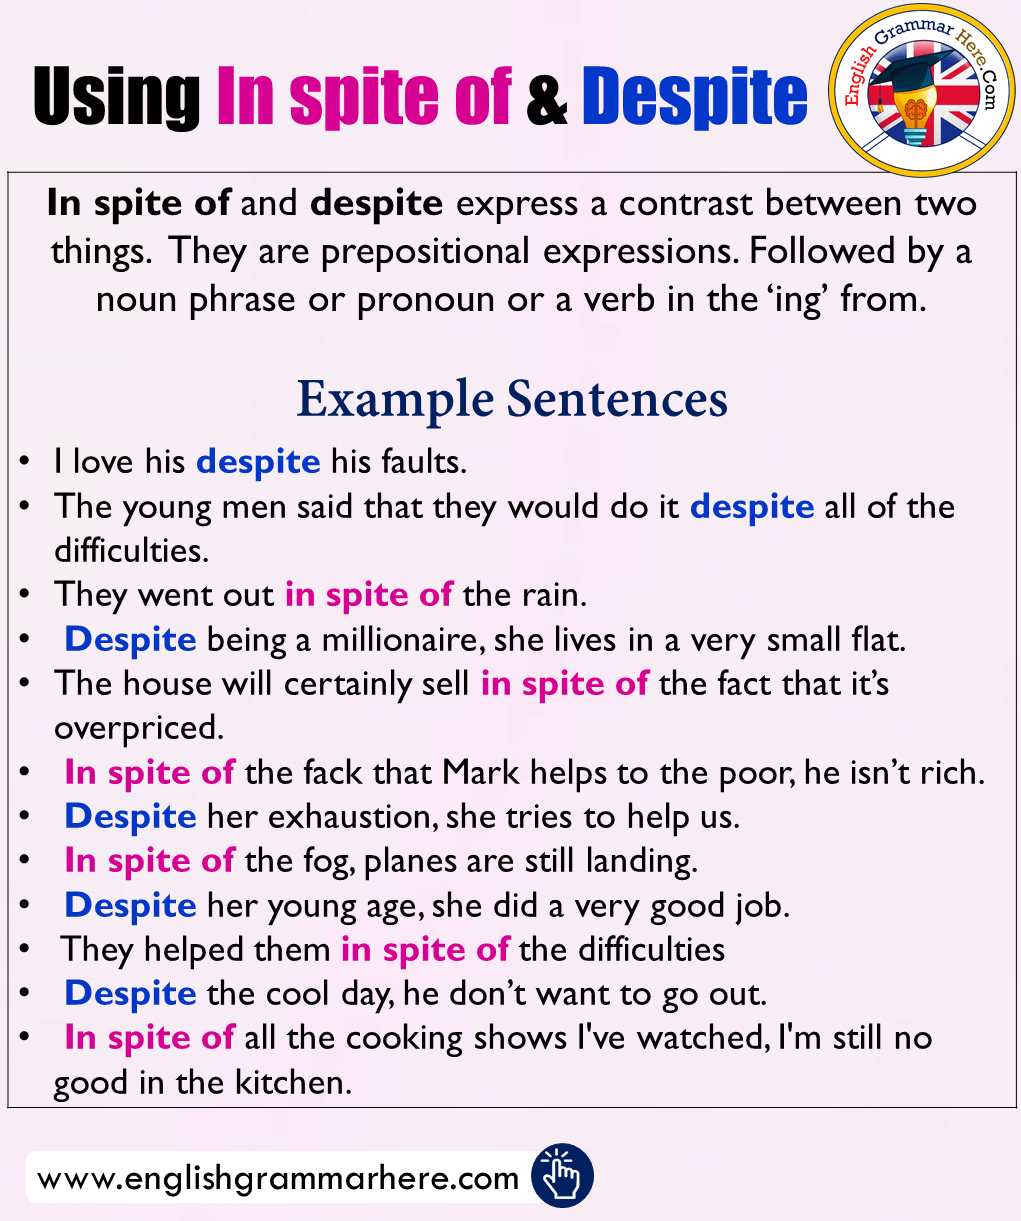 How to Use In spite of and Despite, Definitions and Example Sentences